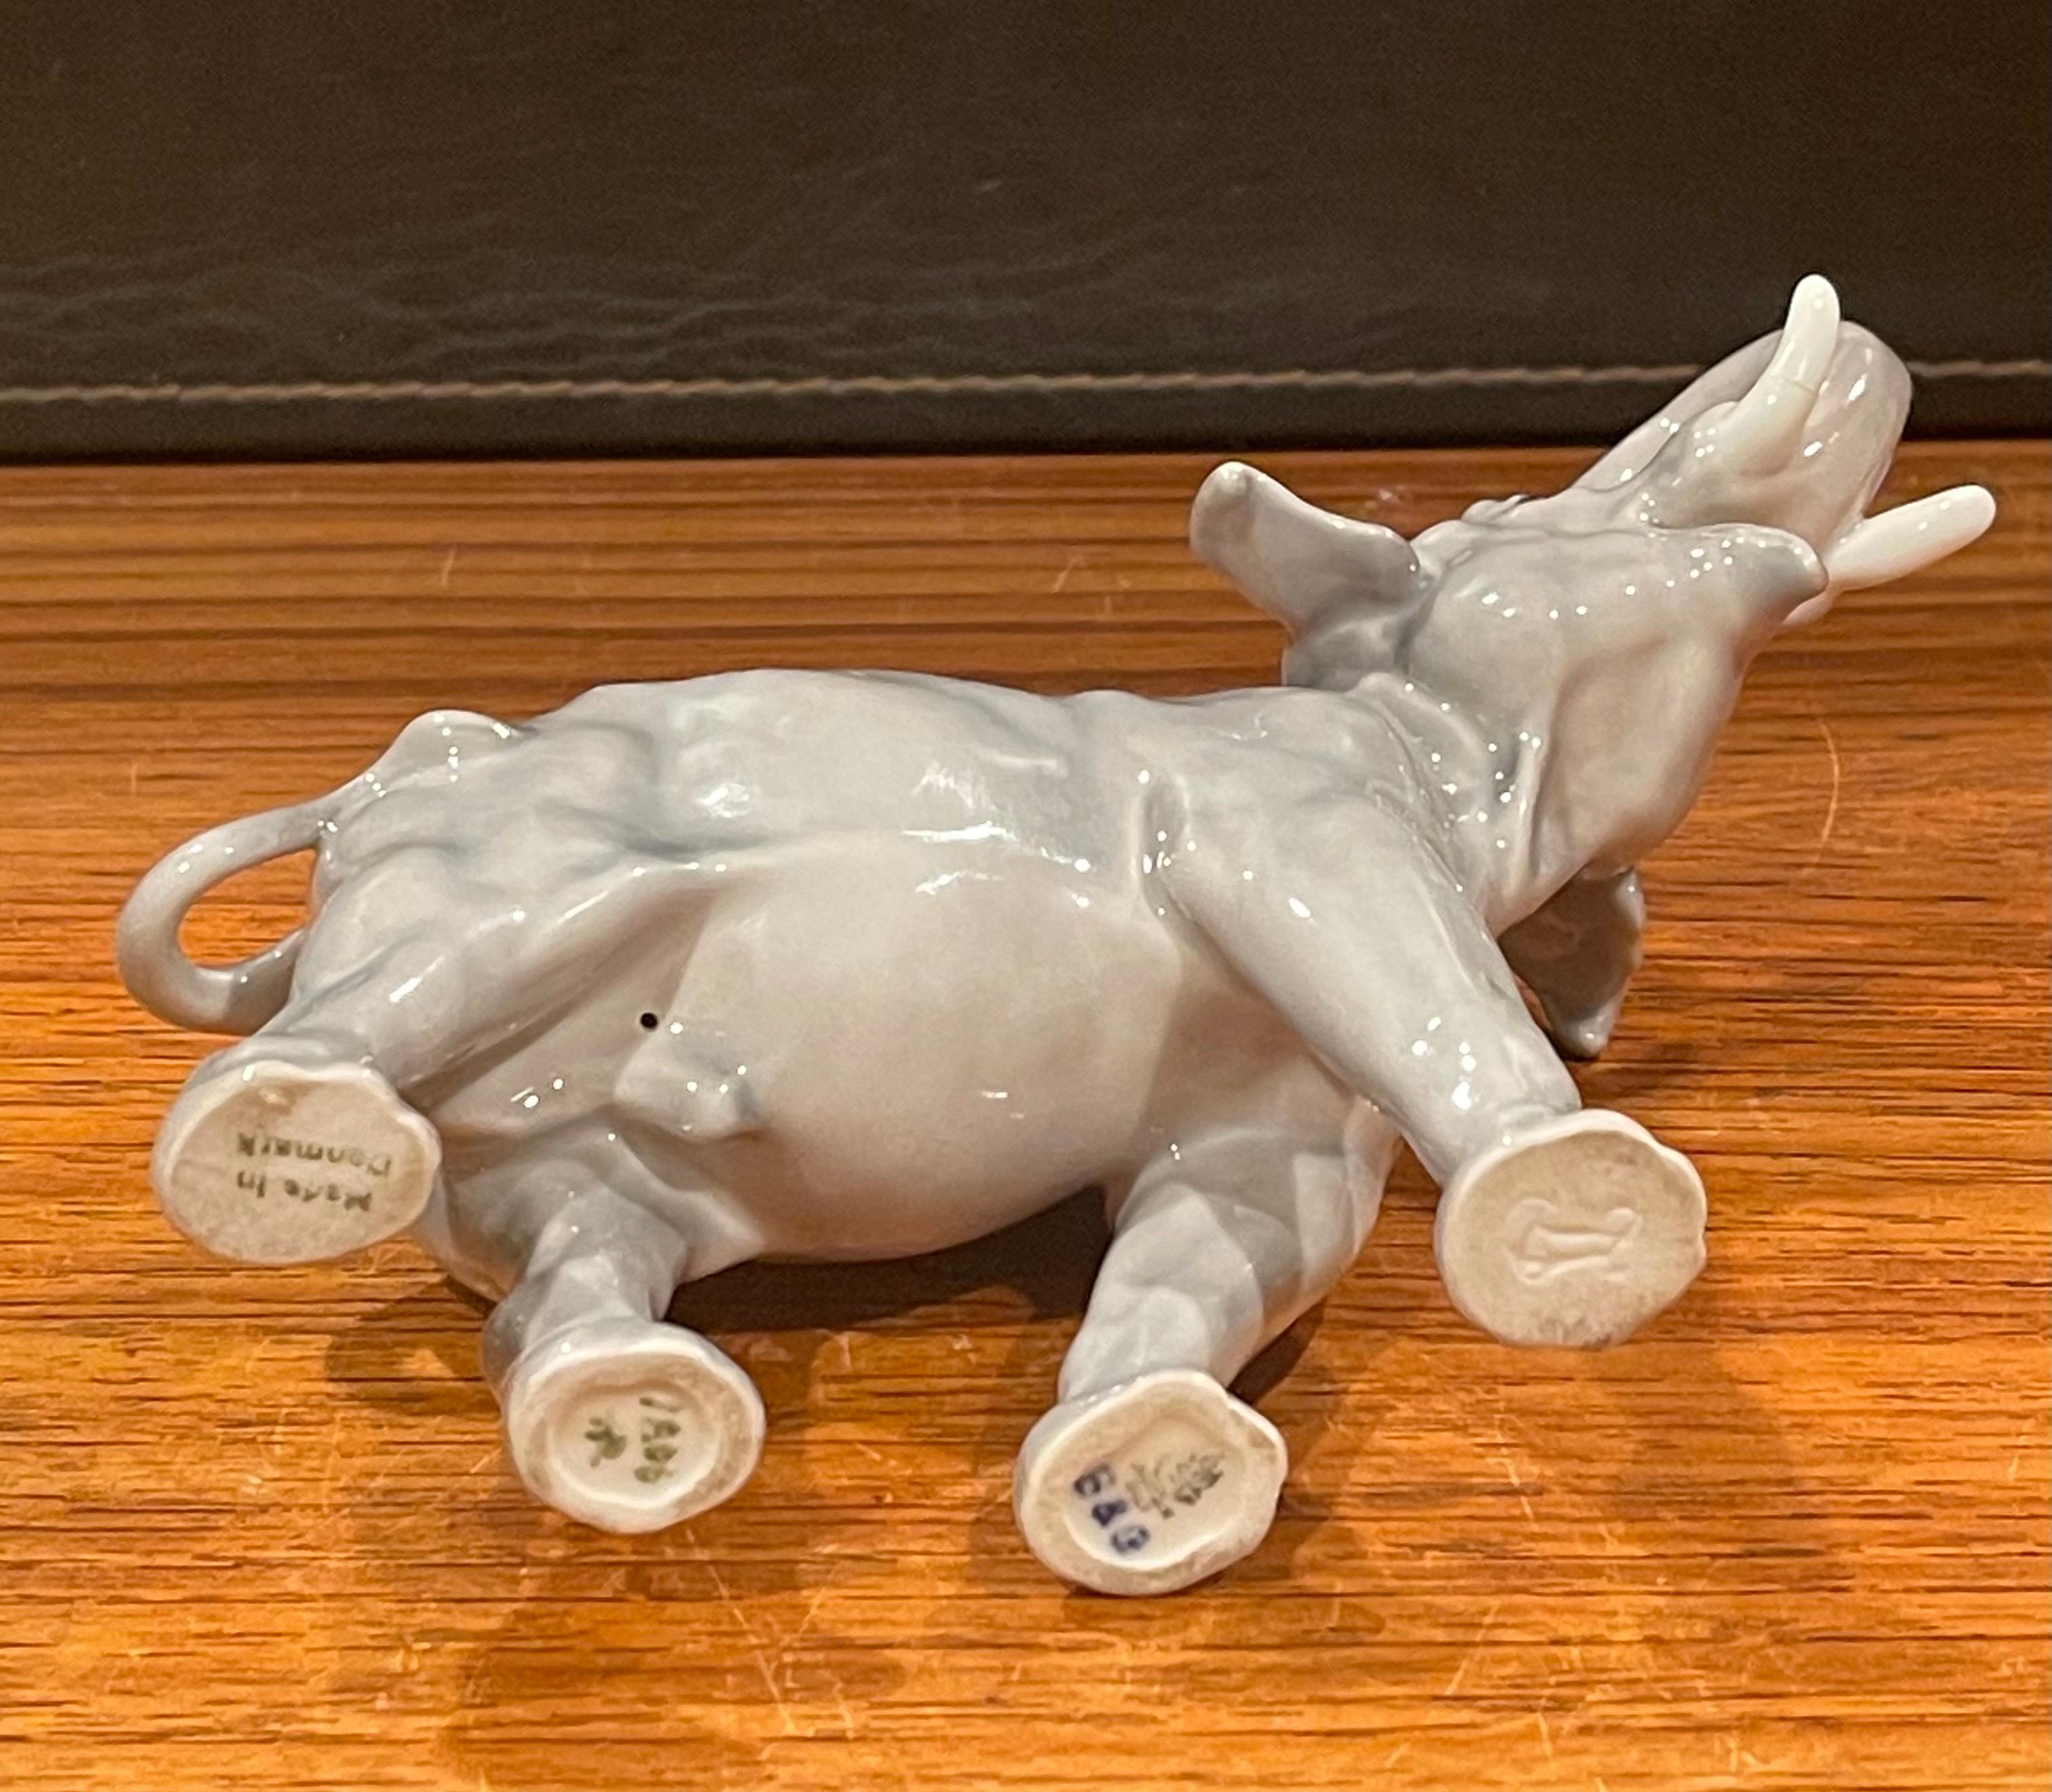 Hand Painted Porcelain Elephant Sculpture by Bing & Grondahl In Good Condition For Sale In San Diego, CA